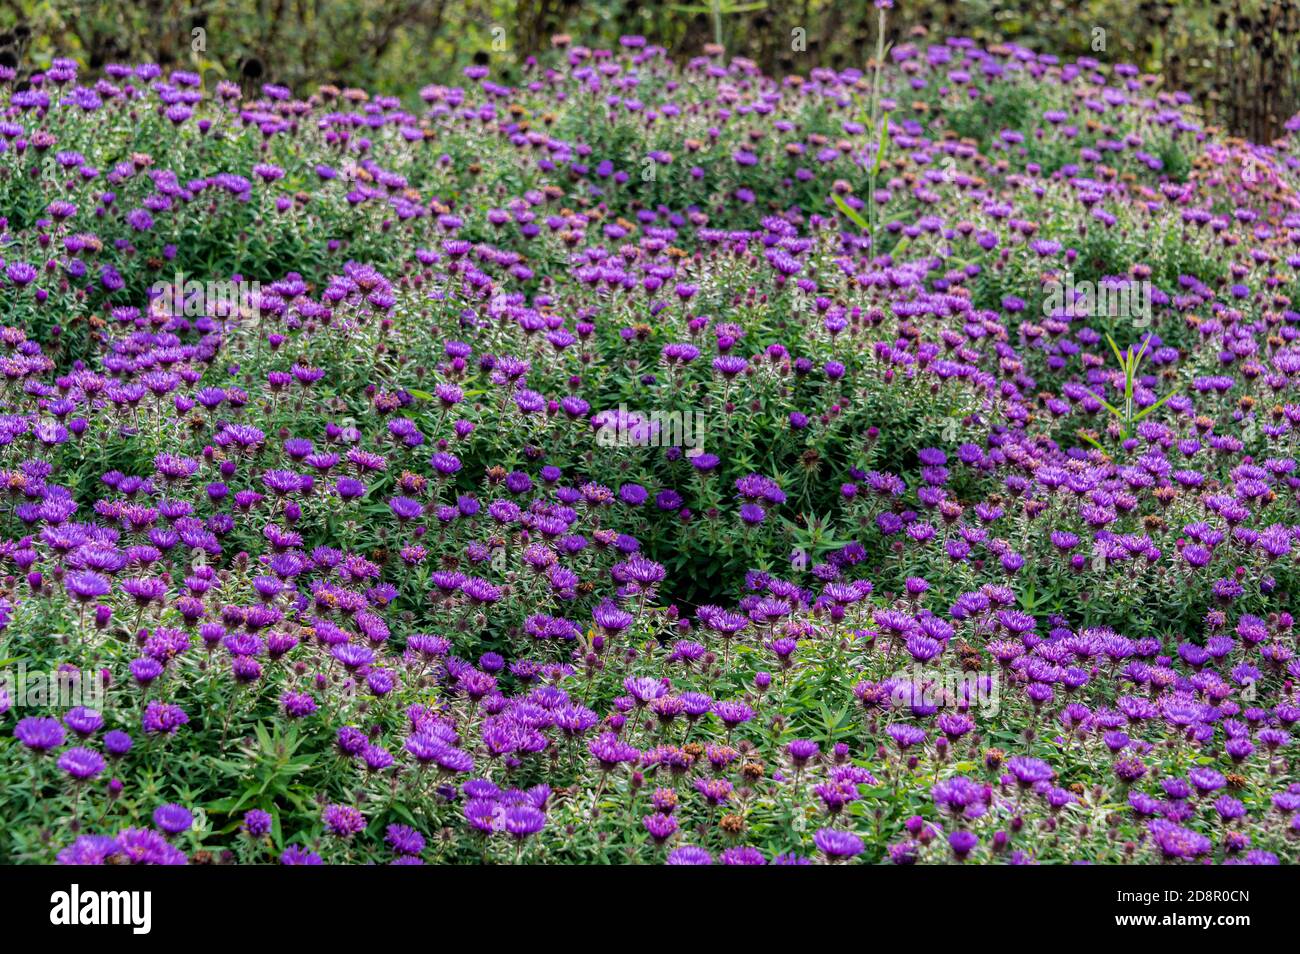 symphyotrichum novae-angliae purple dome. Asteraceae, New England aster Purple Dome.Purple daisy flowers in autumn. Stock Photo